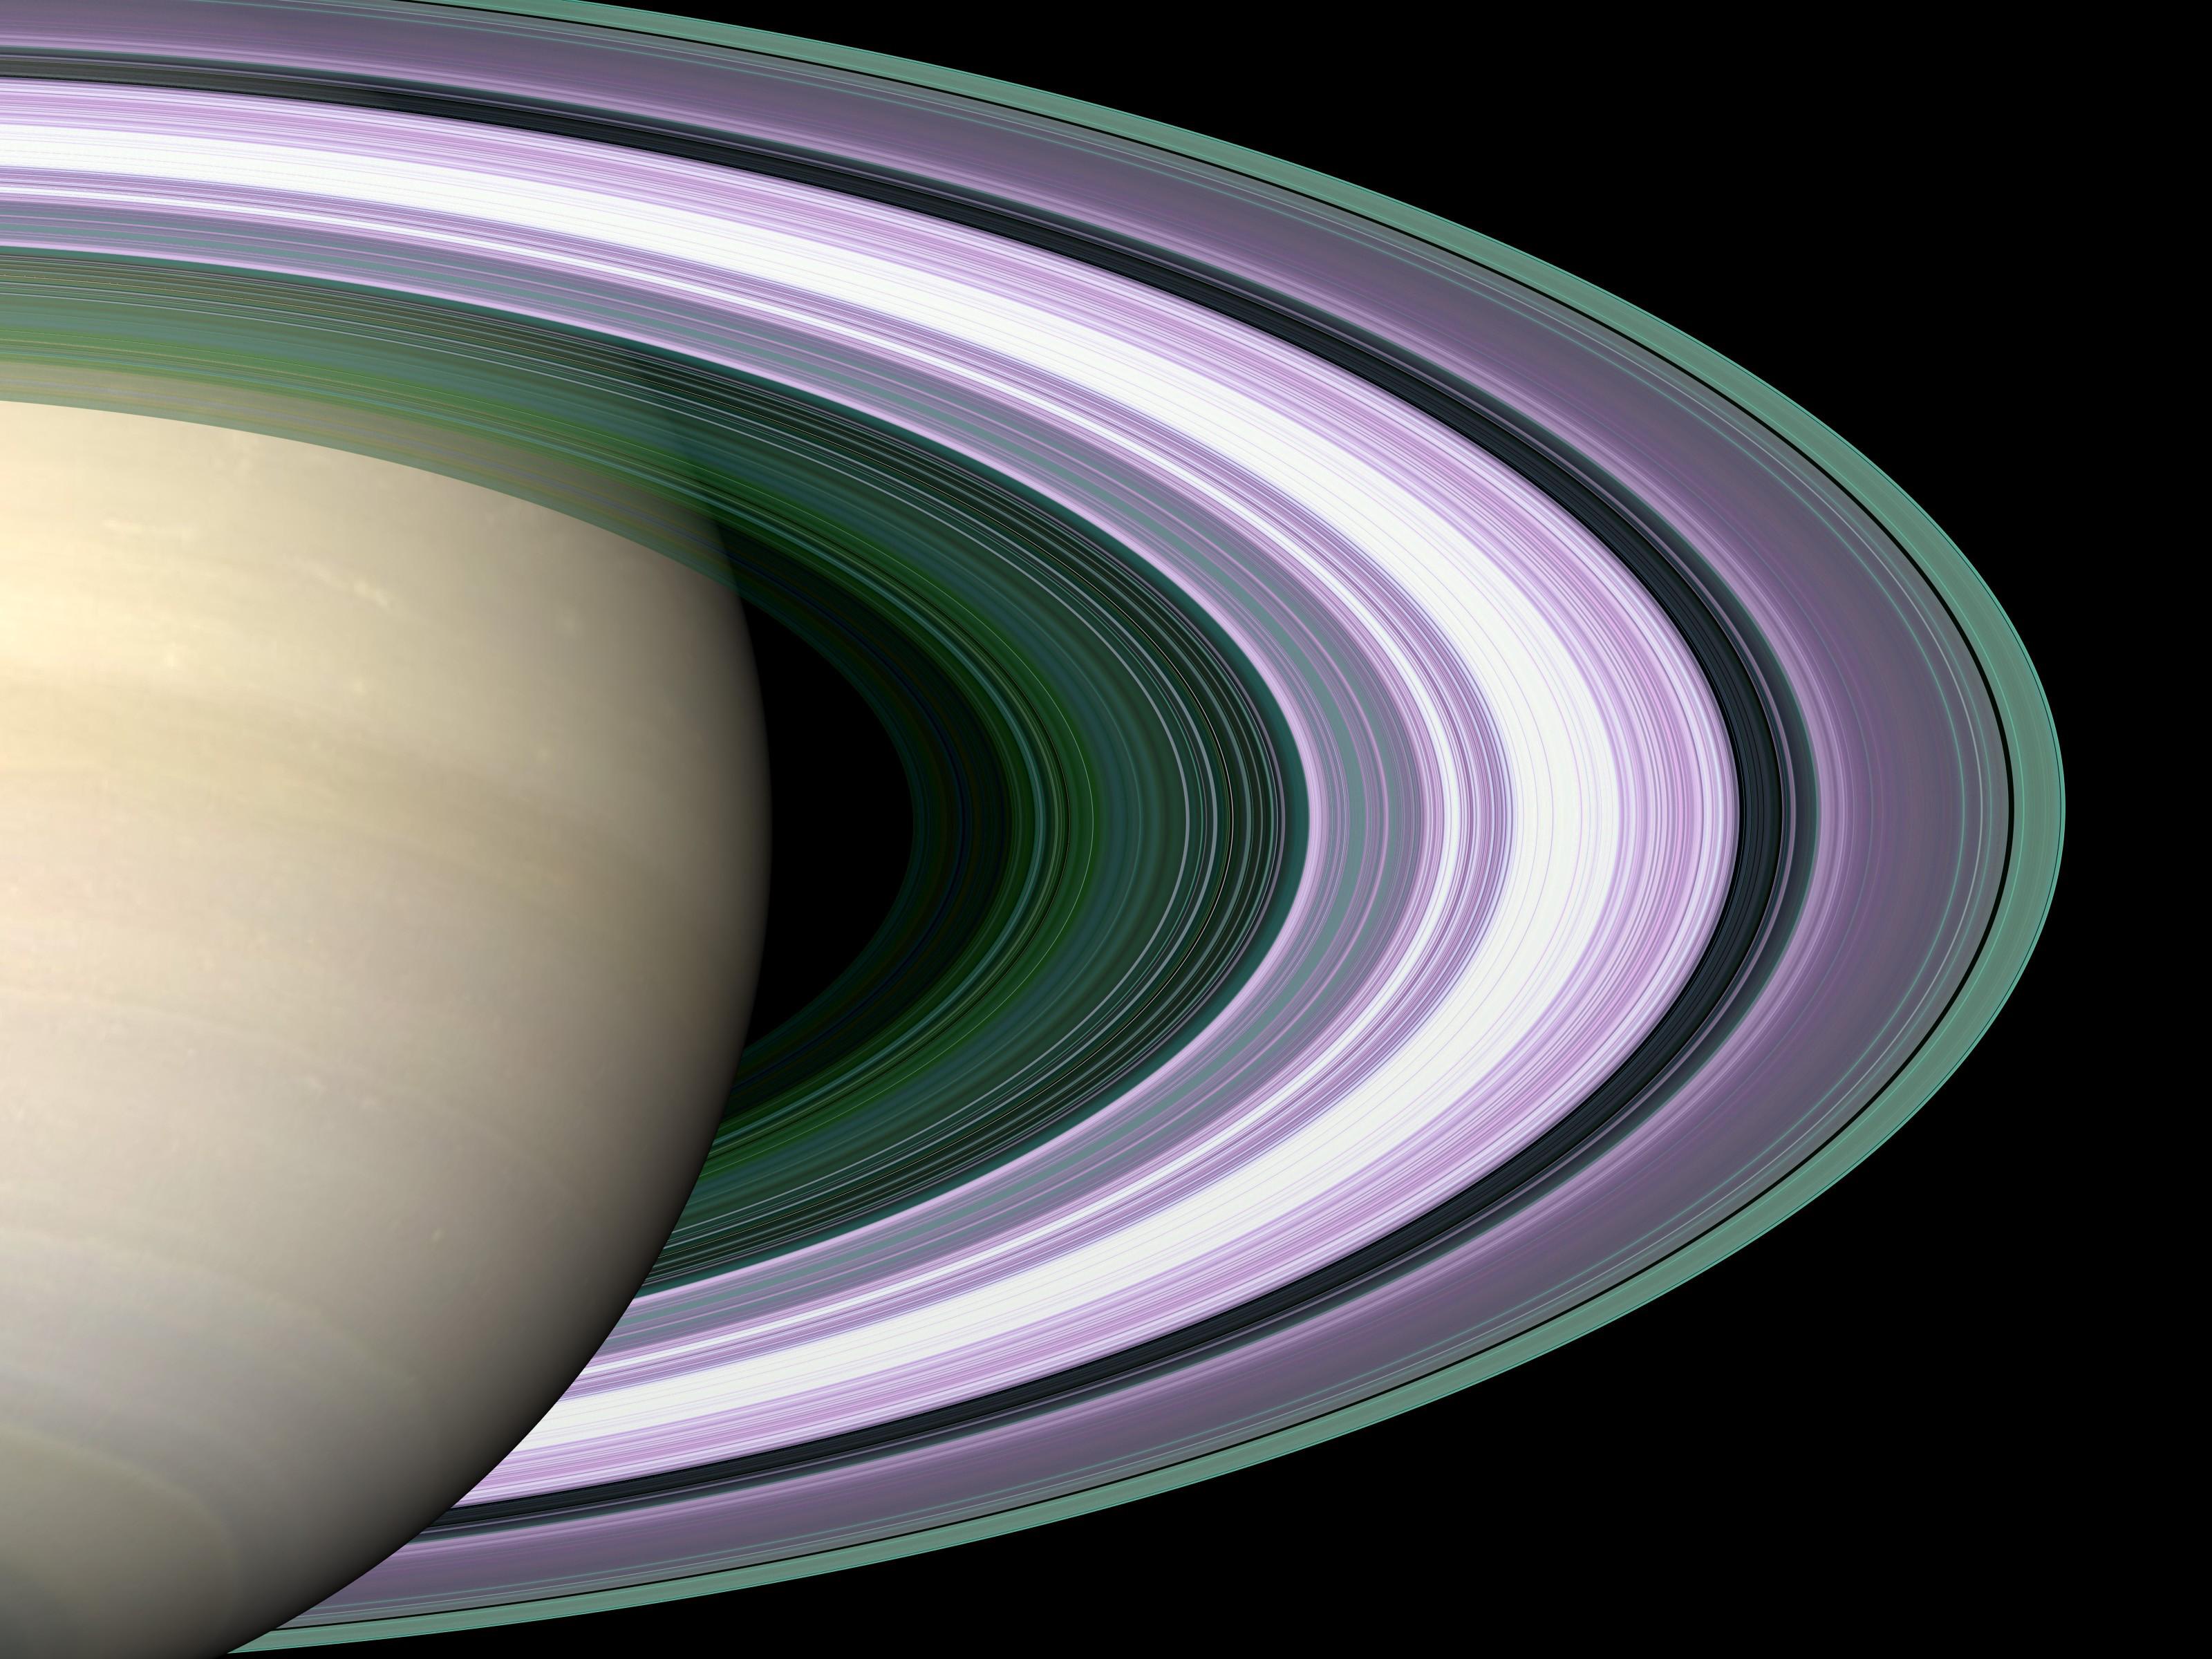 APOD: 2005 May 25 - Particle Sizes in Saturns Rings